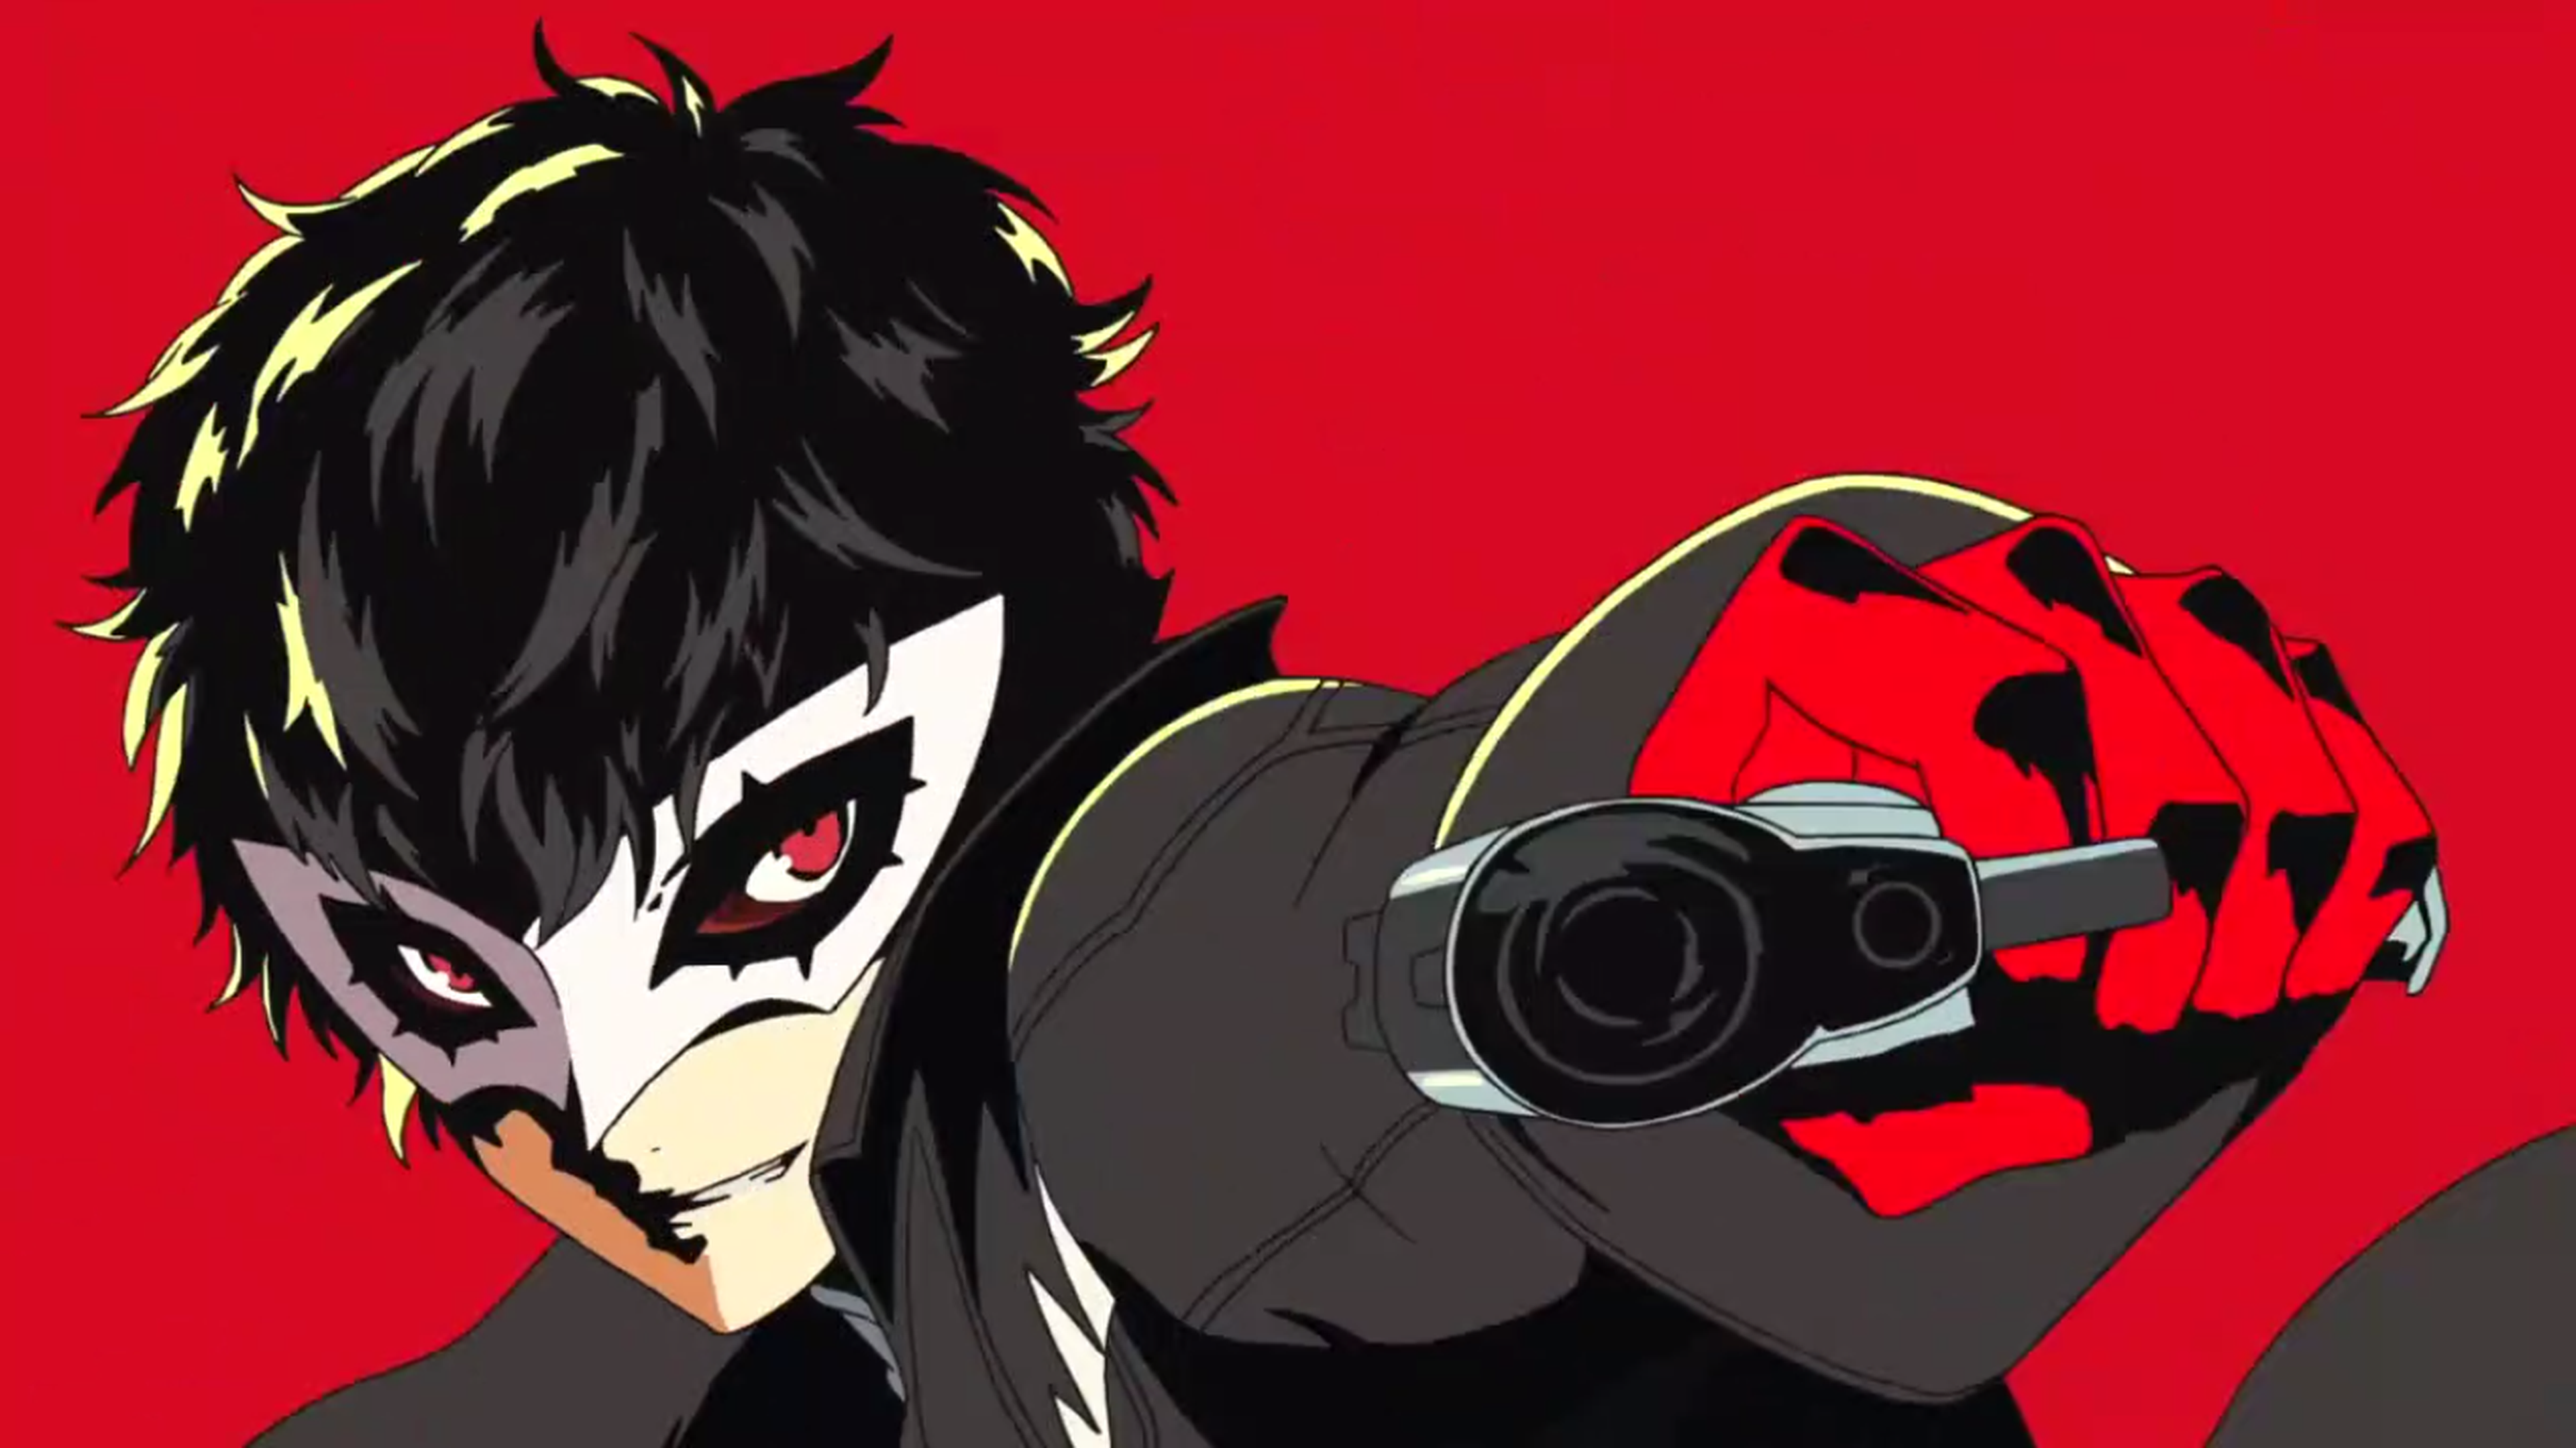 Persona 5 The Animation - Teaser